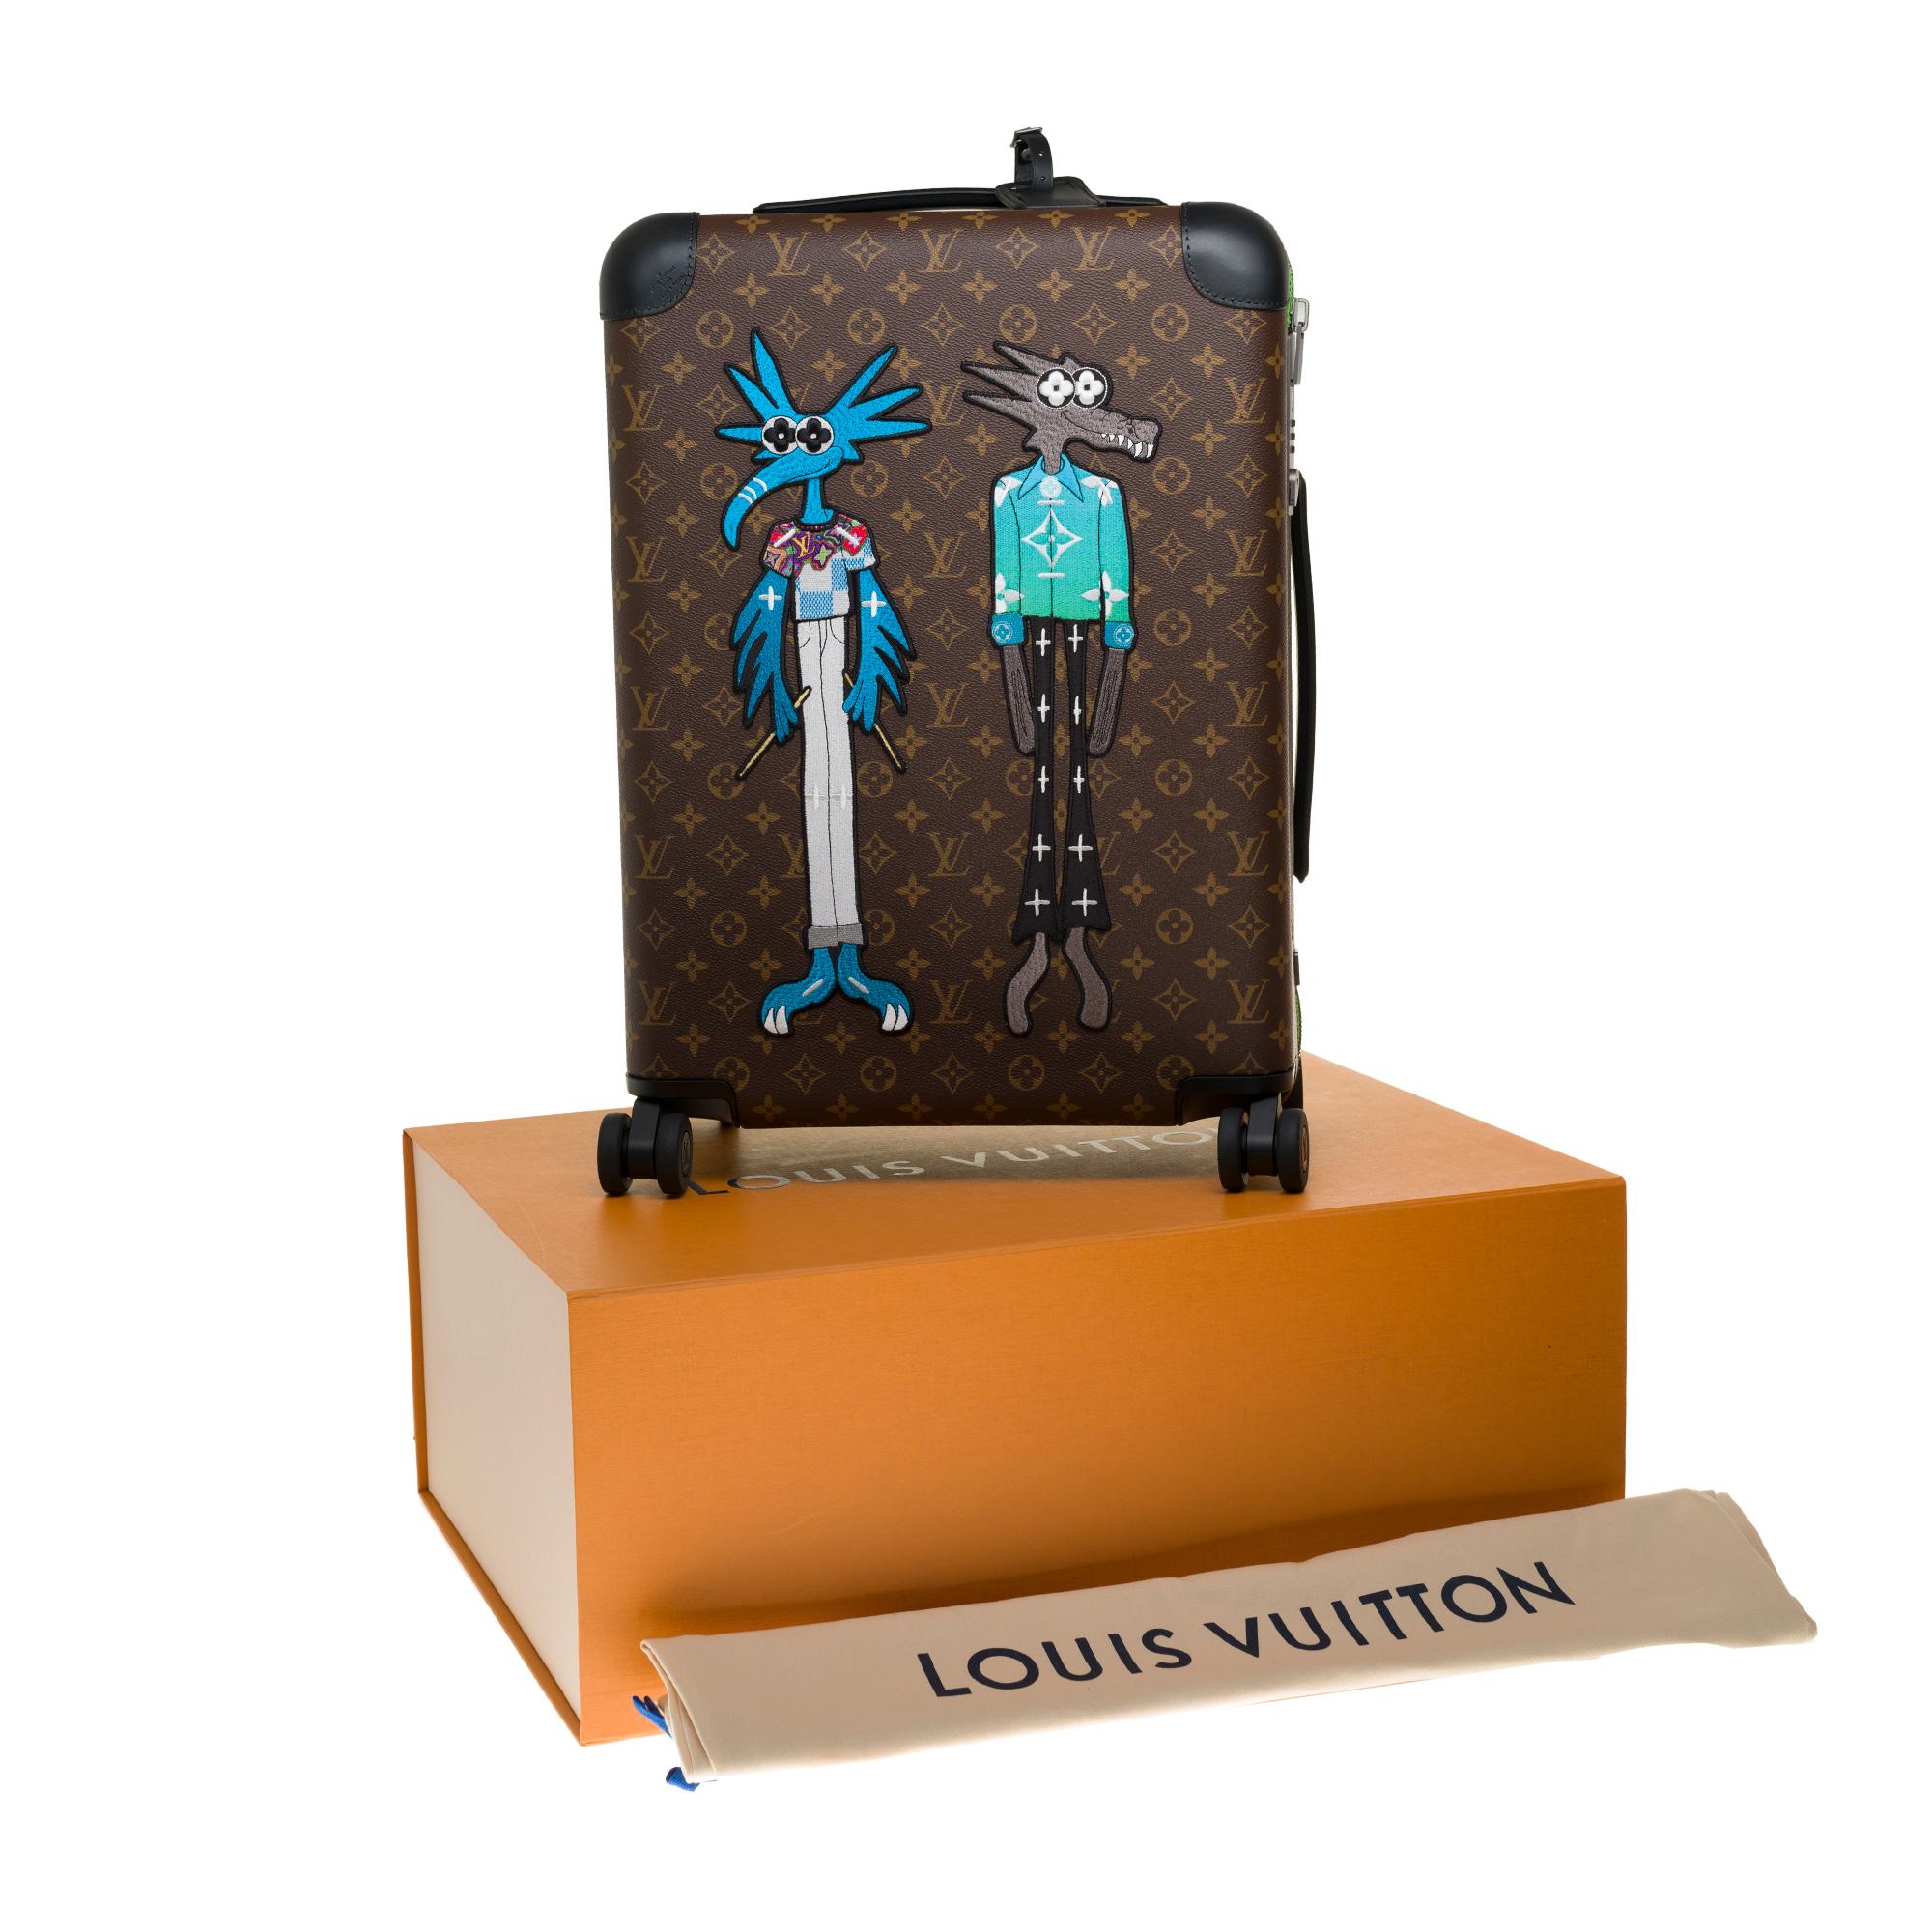 NEW/LIMITED EDITION/Louis Vuitton Horizon 55 Suitcase in brown monogram canvas 5